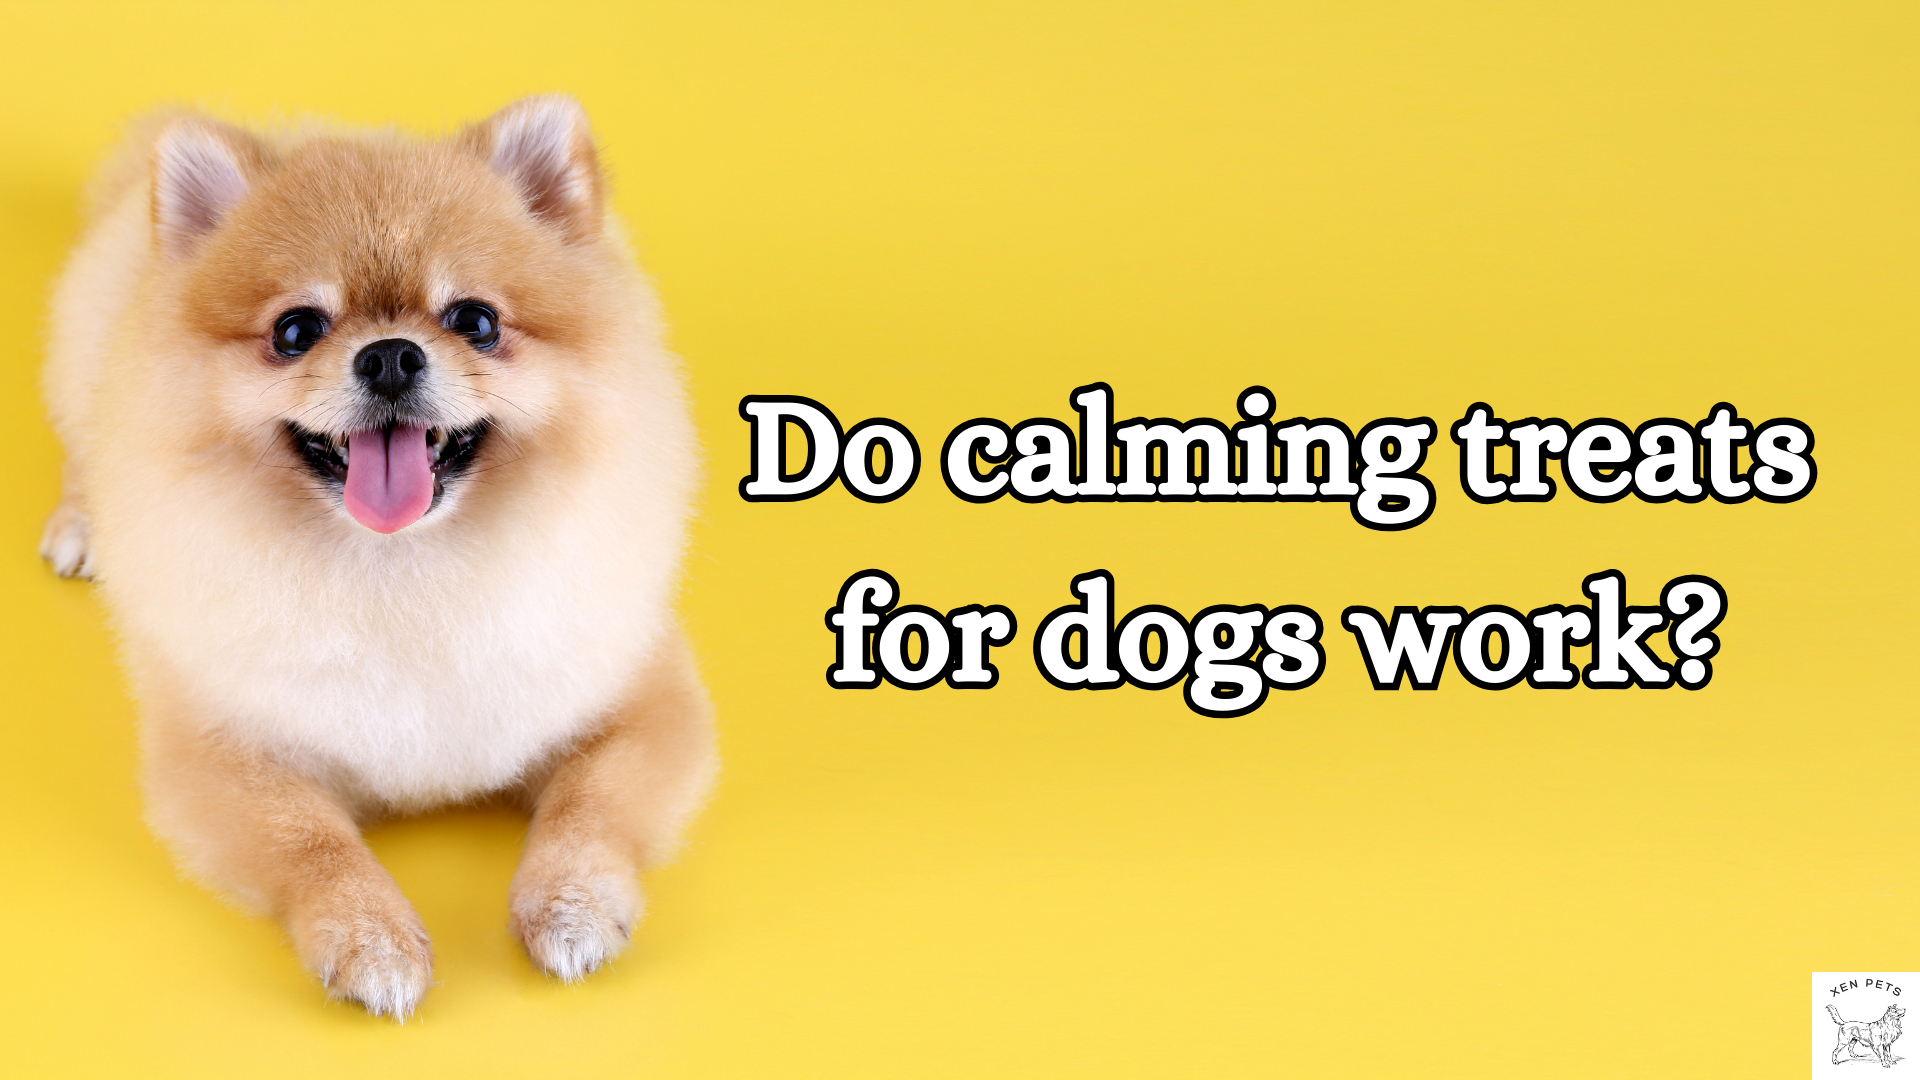 Do calming treats for dogs work